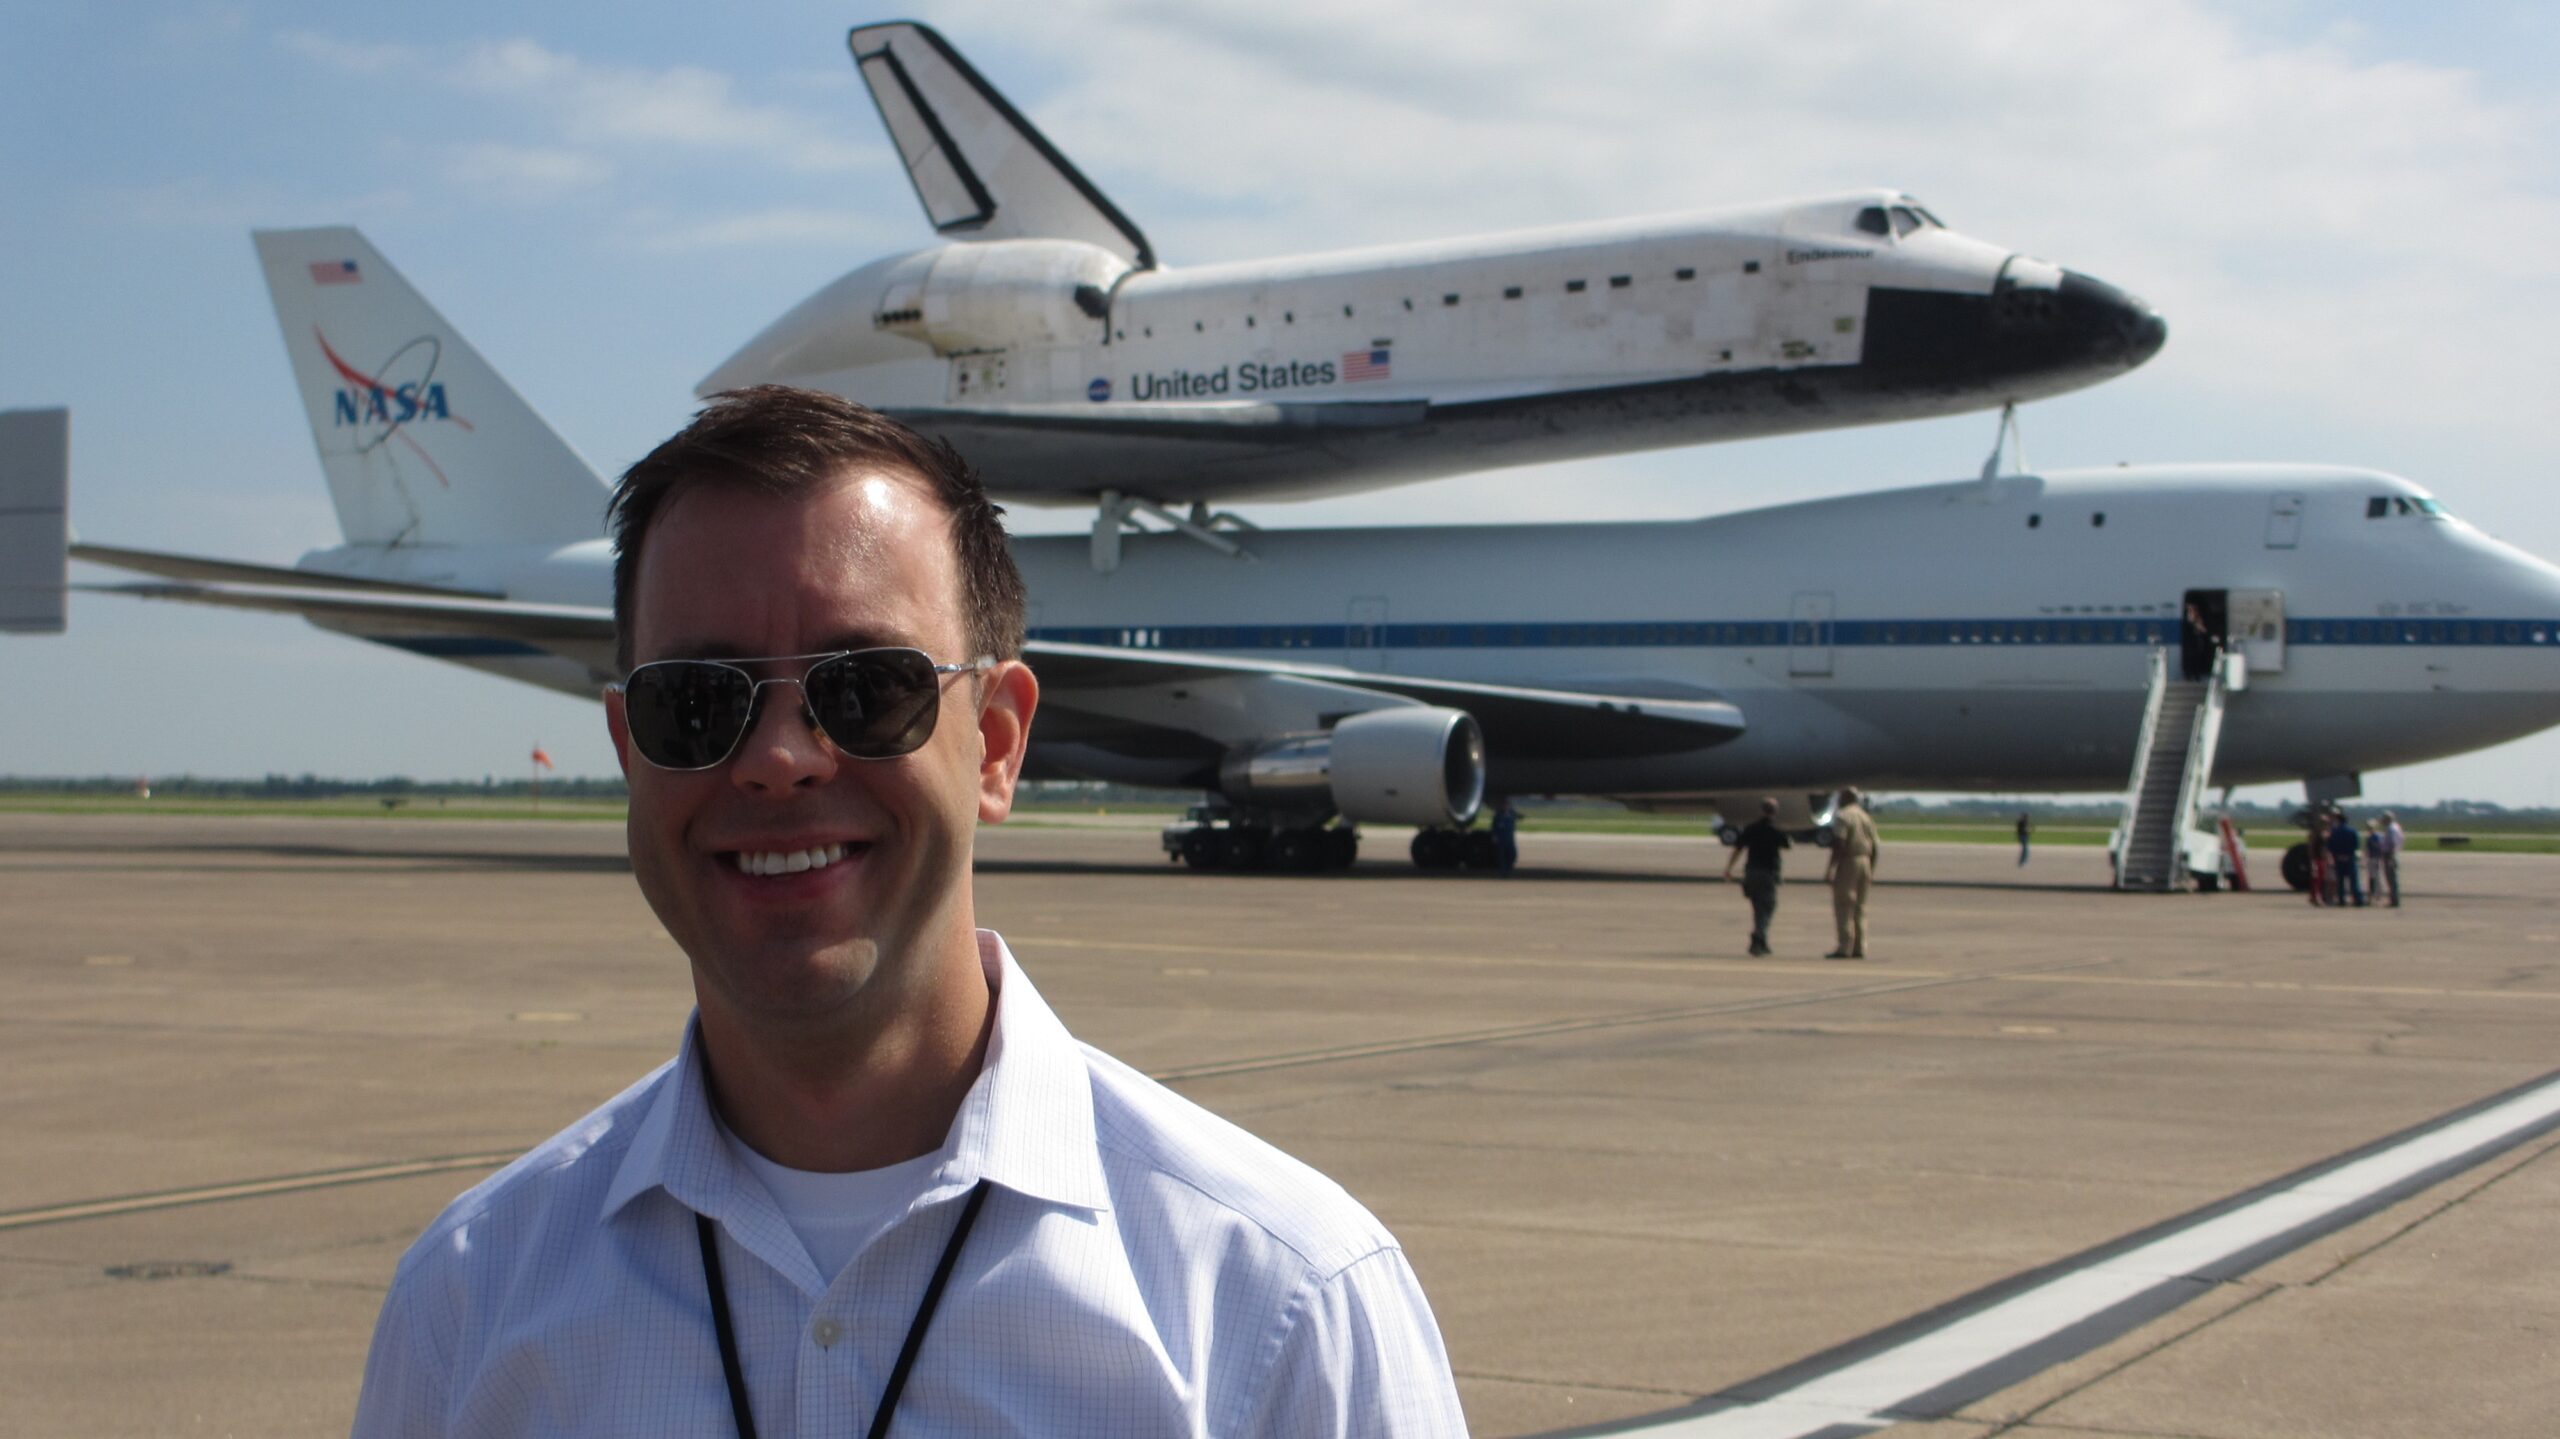 Josh Byerly '99 on the tarmac with the Space Shuttle Endeavour atop a NASA Shuttle Carrier Aircraft in the background. 